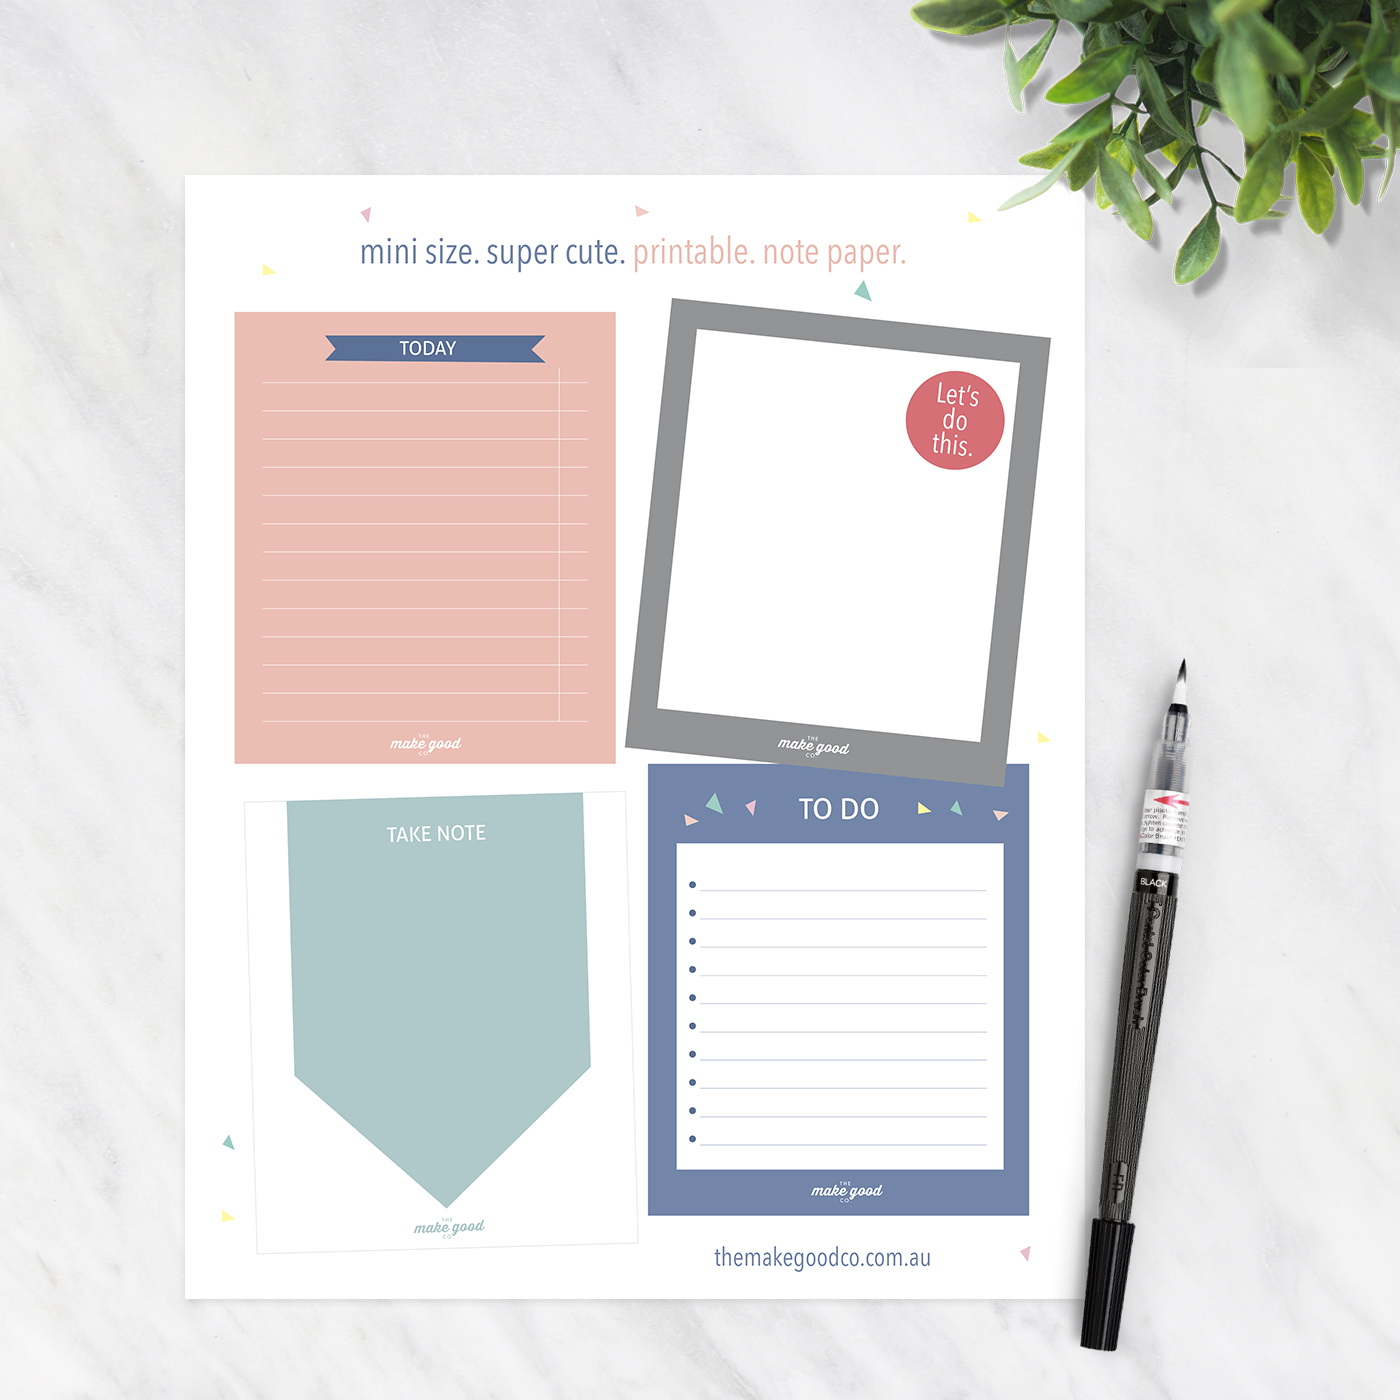 Free printable note paper. Great for planners!